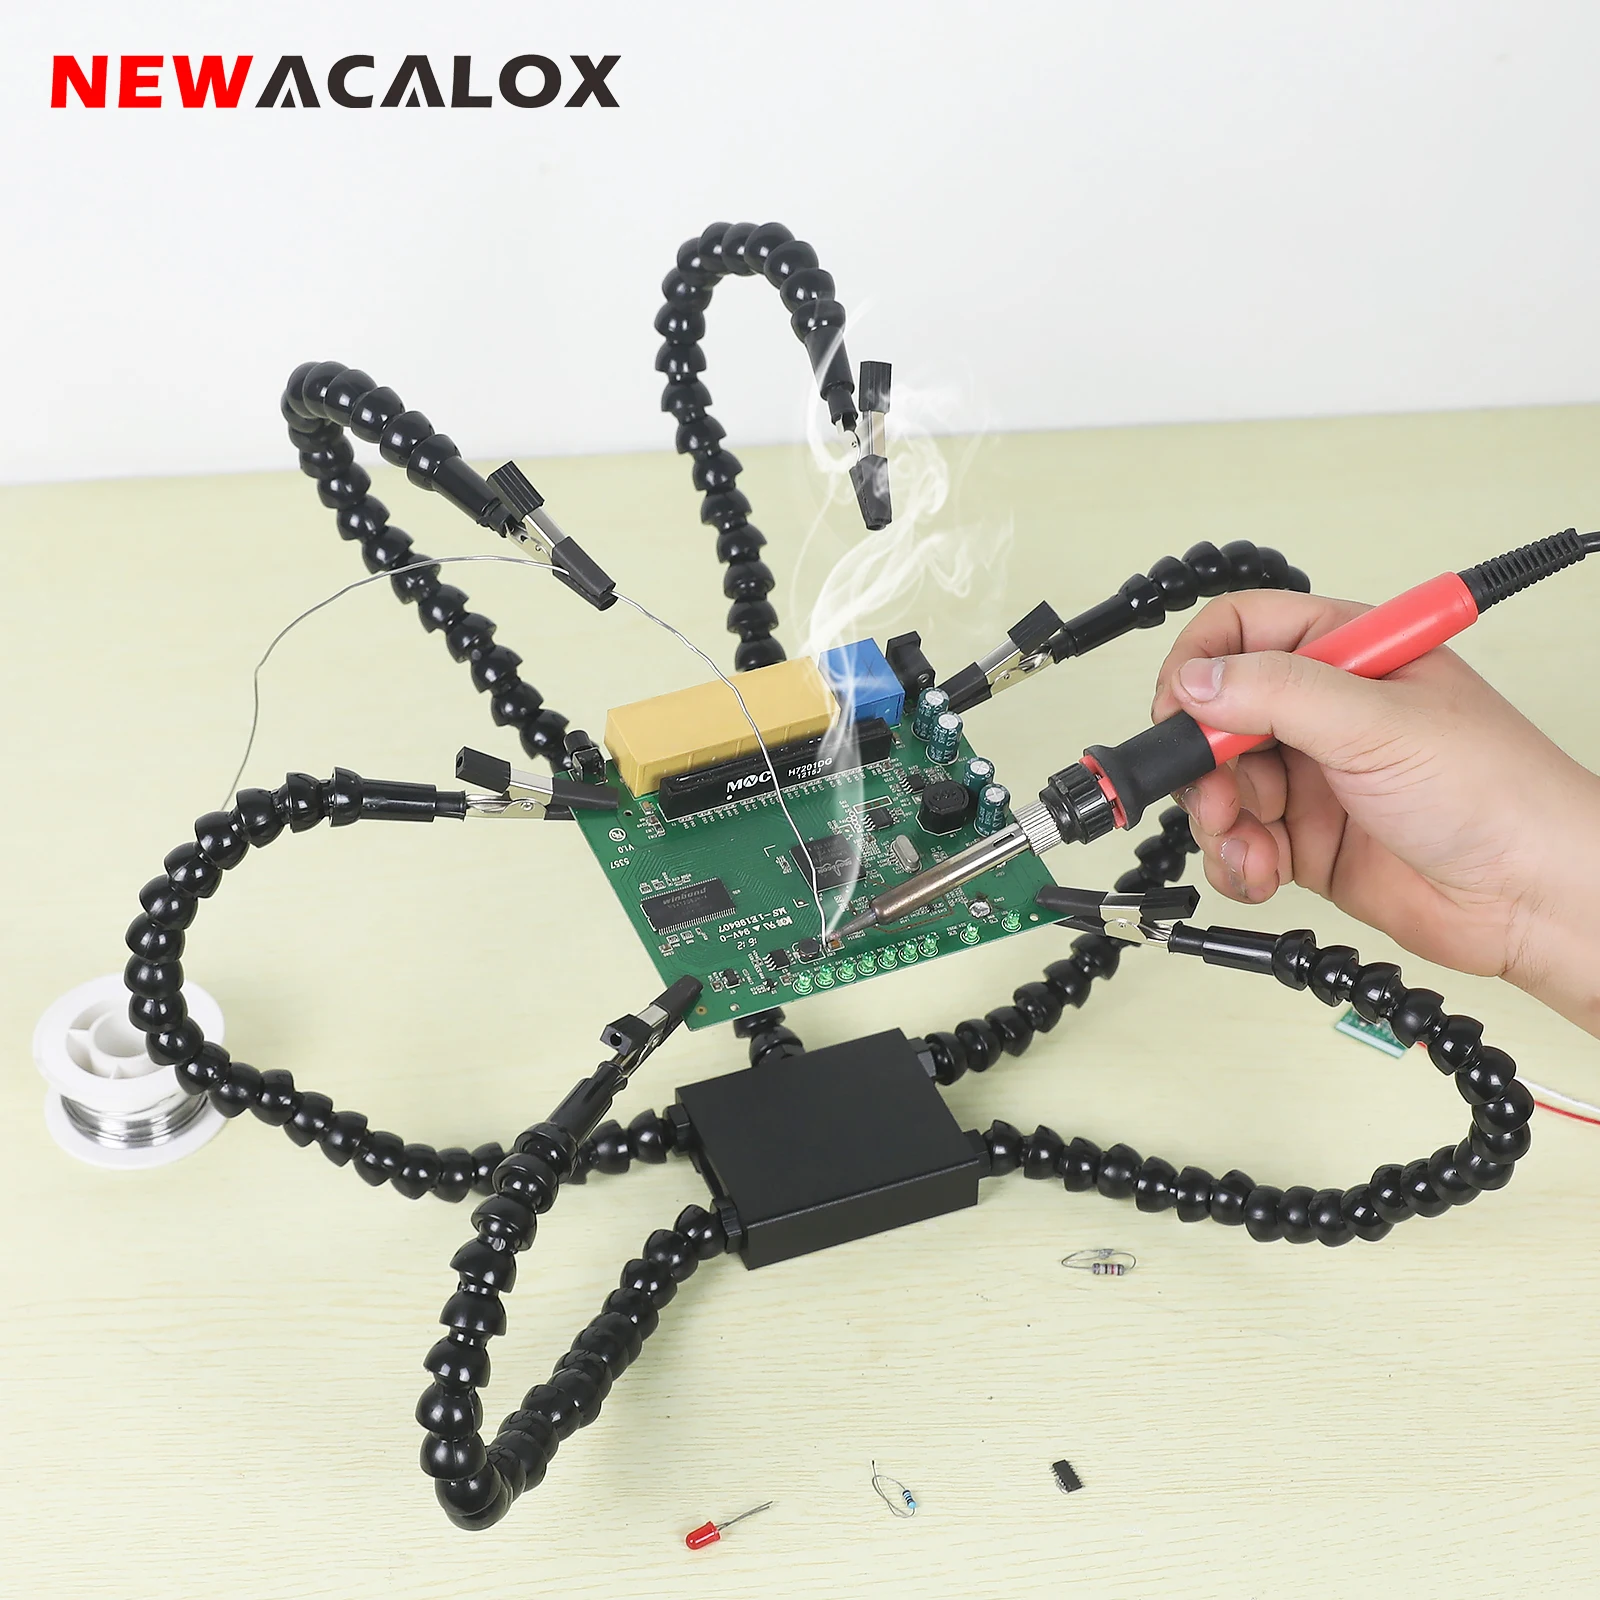 NEWACALOX Third Hand Soldering PCB Holder Tool Four/Five Arms Flexible Helping Hands Crafts Workshop Helping Station Repair Tool